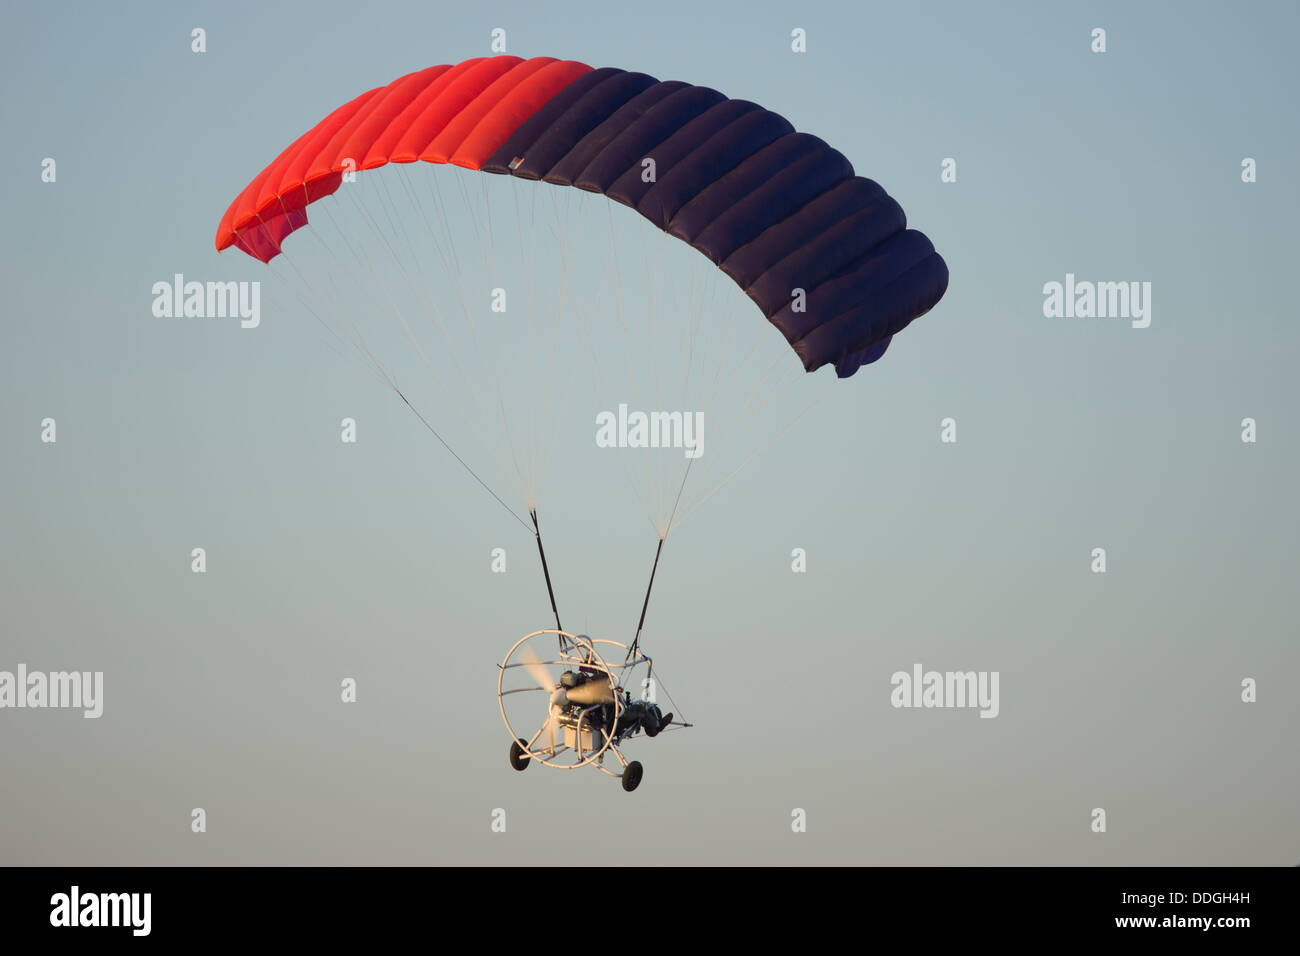 Paramotor over West Texas. Stock Photo